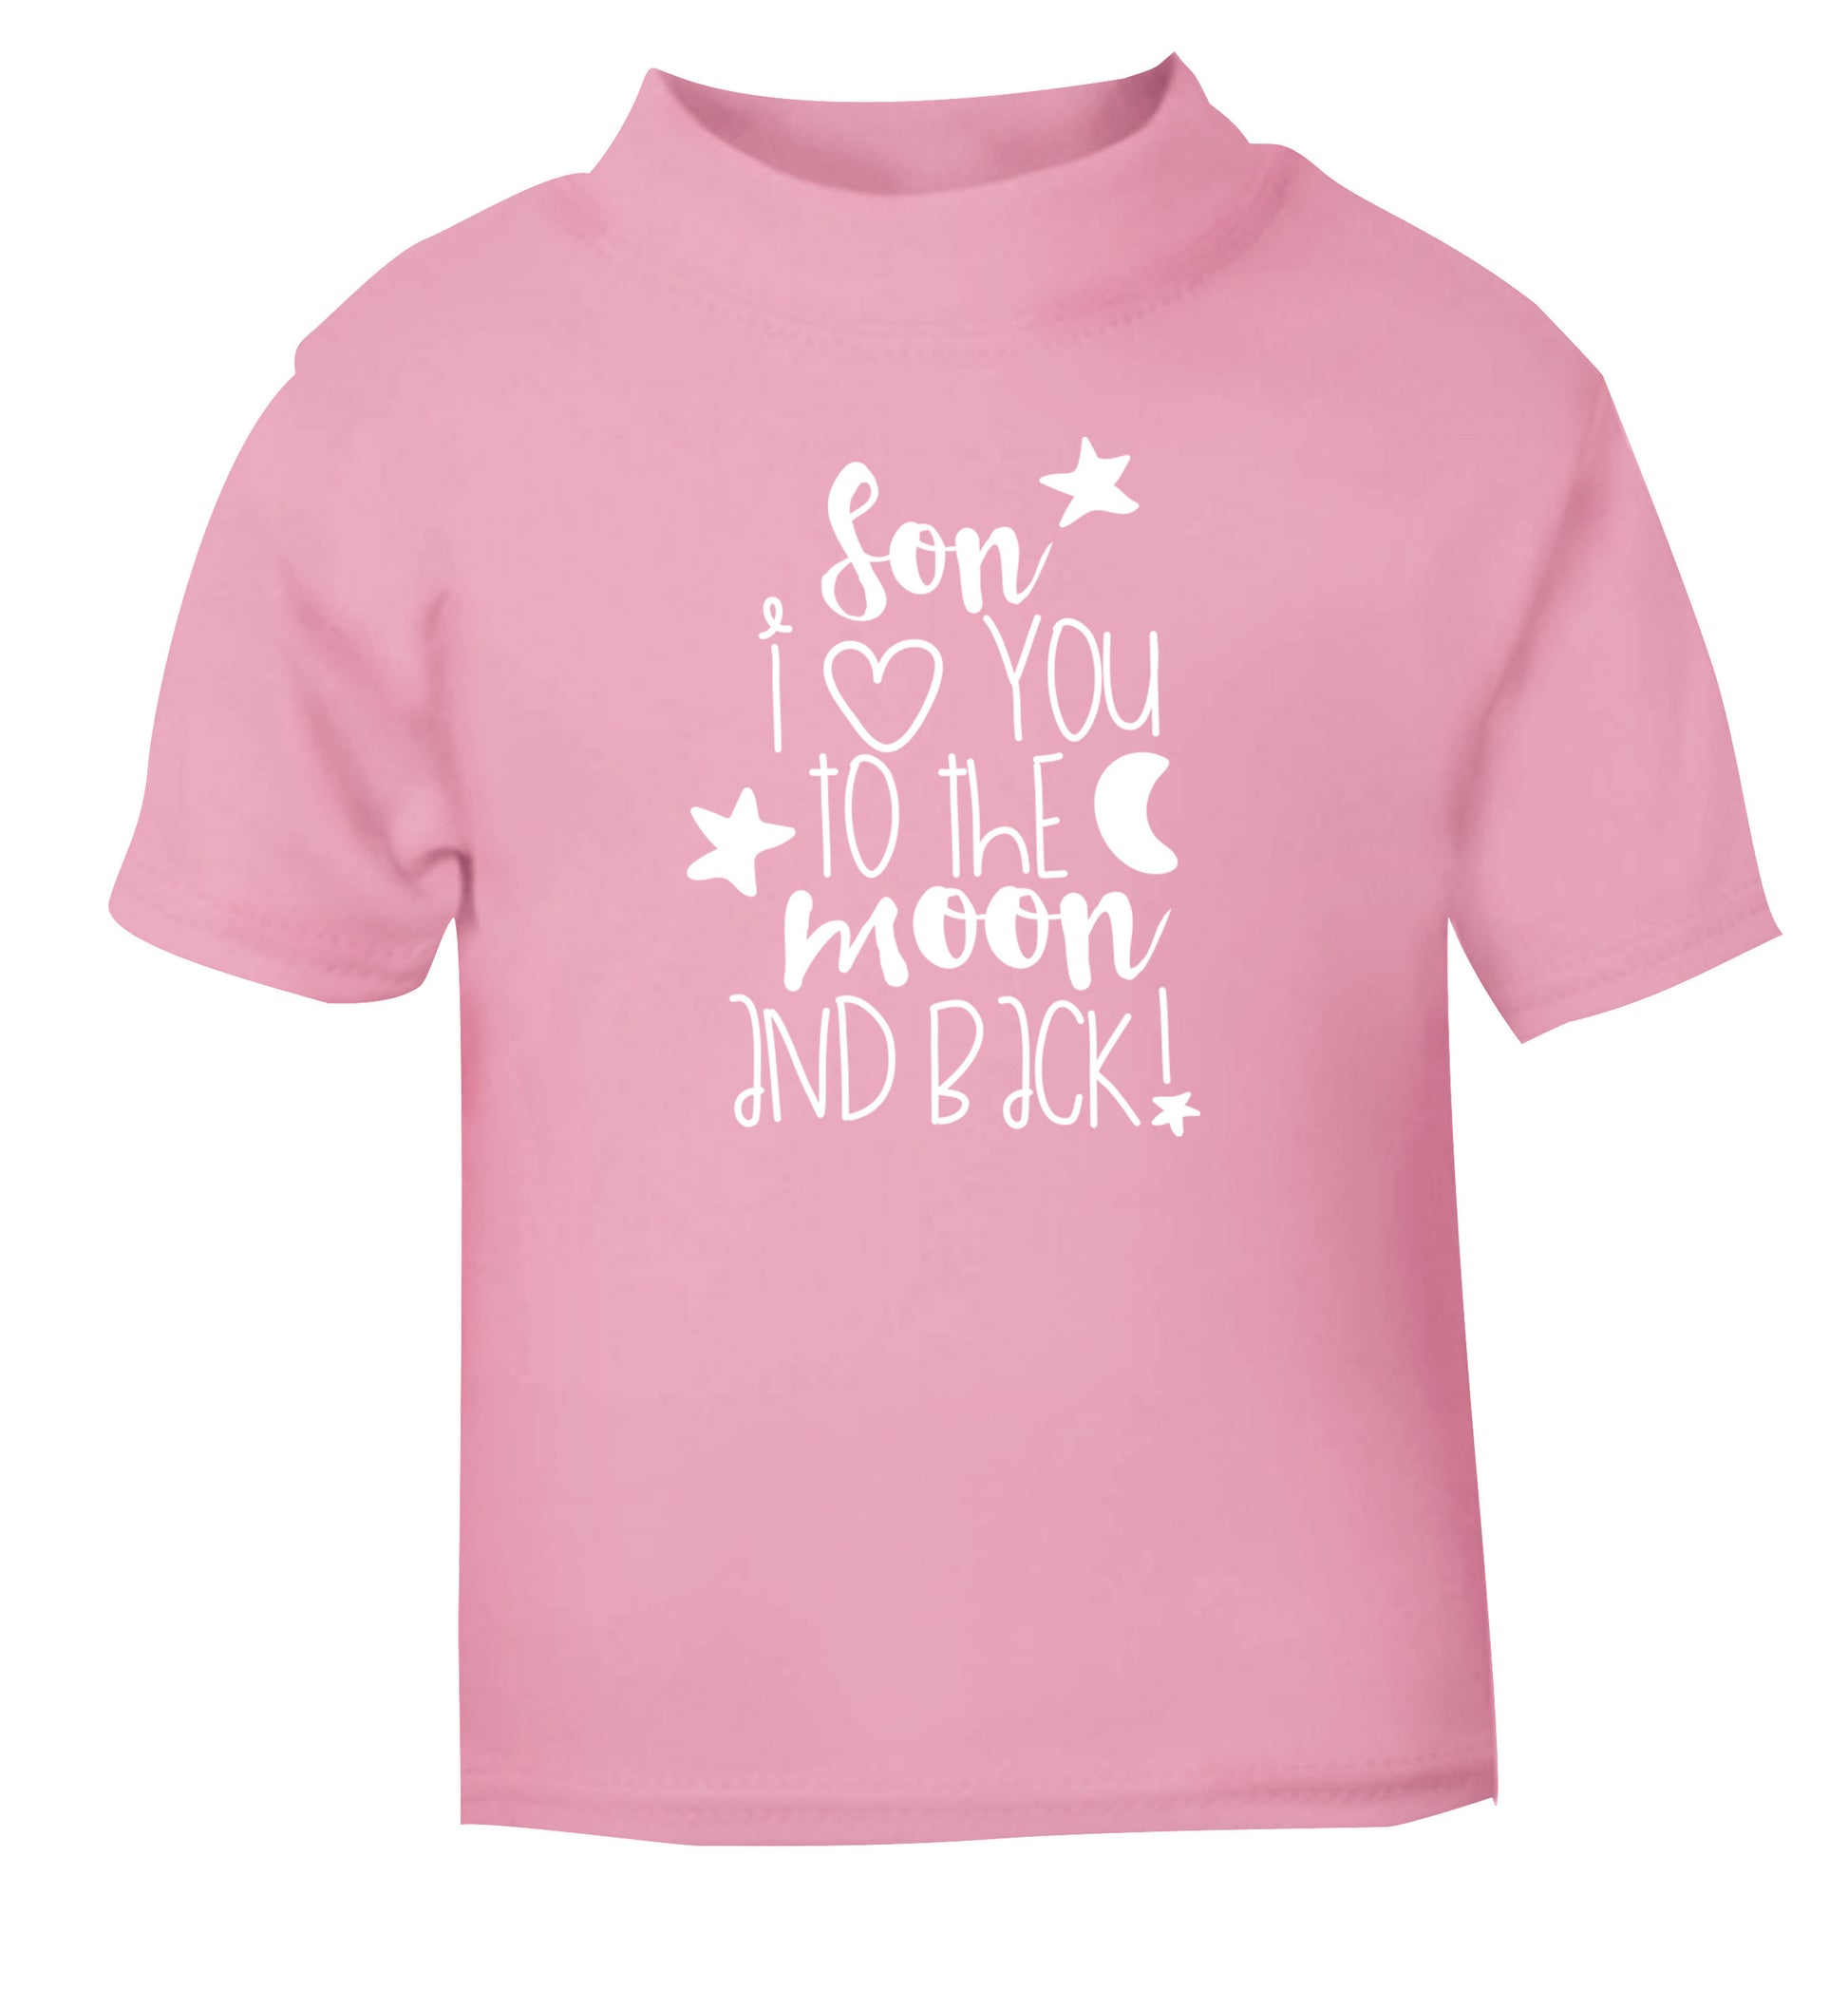 Son I love you to the moon and back light pink Baby Toddler Tshirt 2 Years